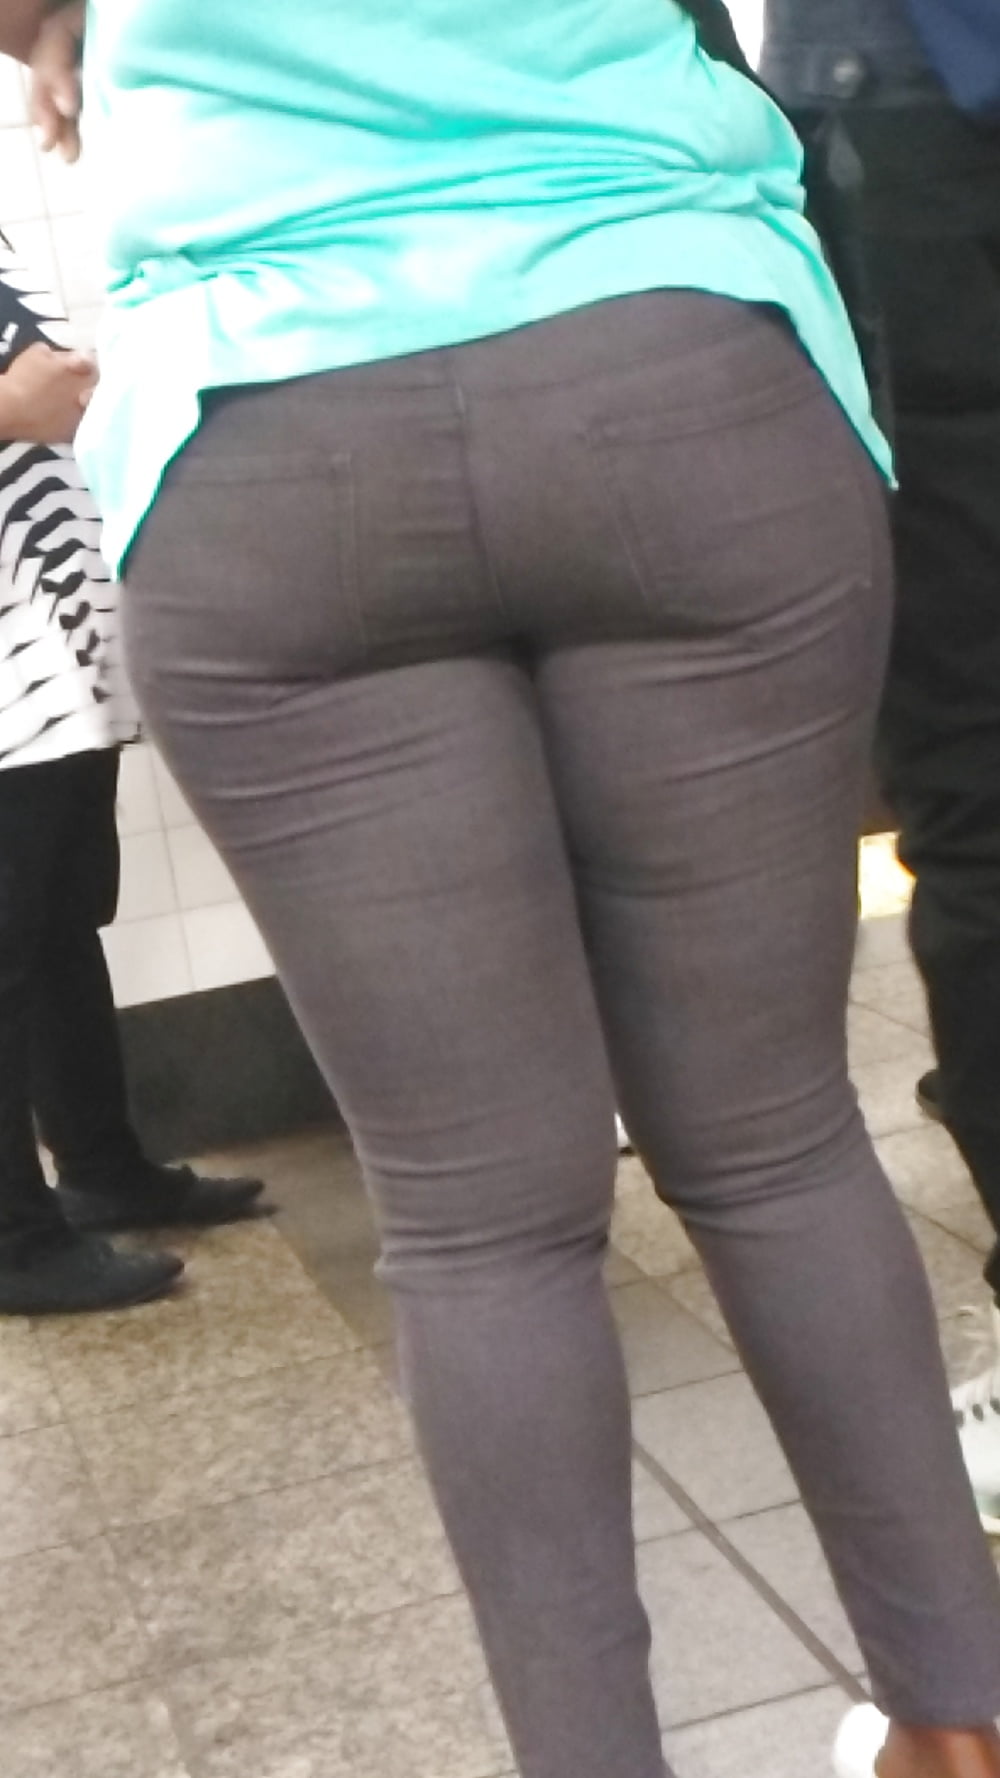 Thick ass mature booty meat candid in subway (6/7)